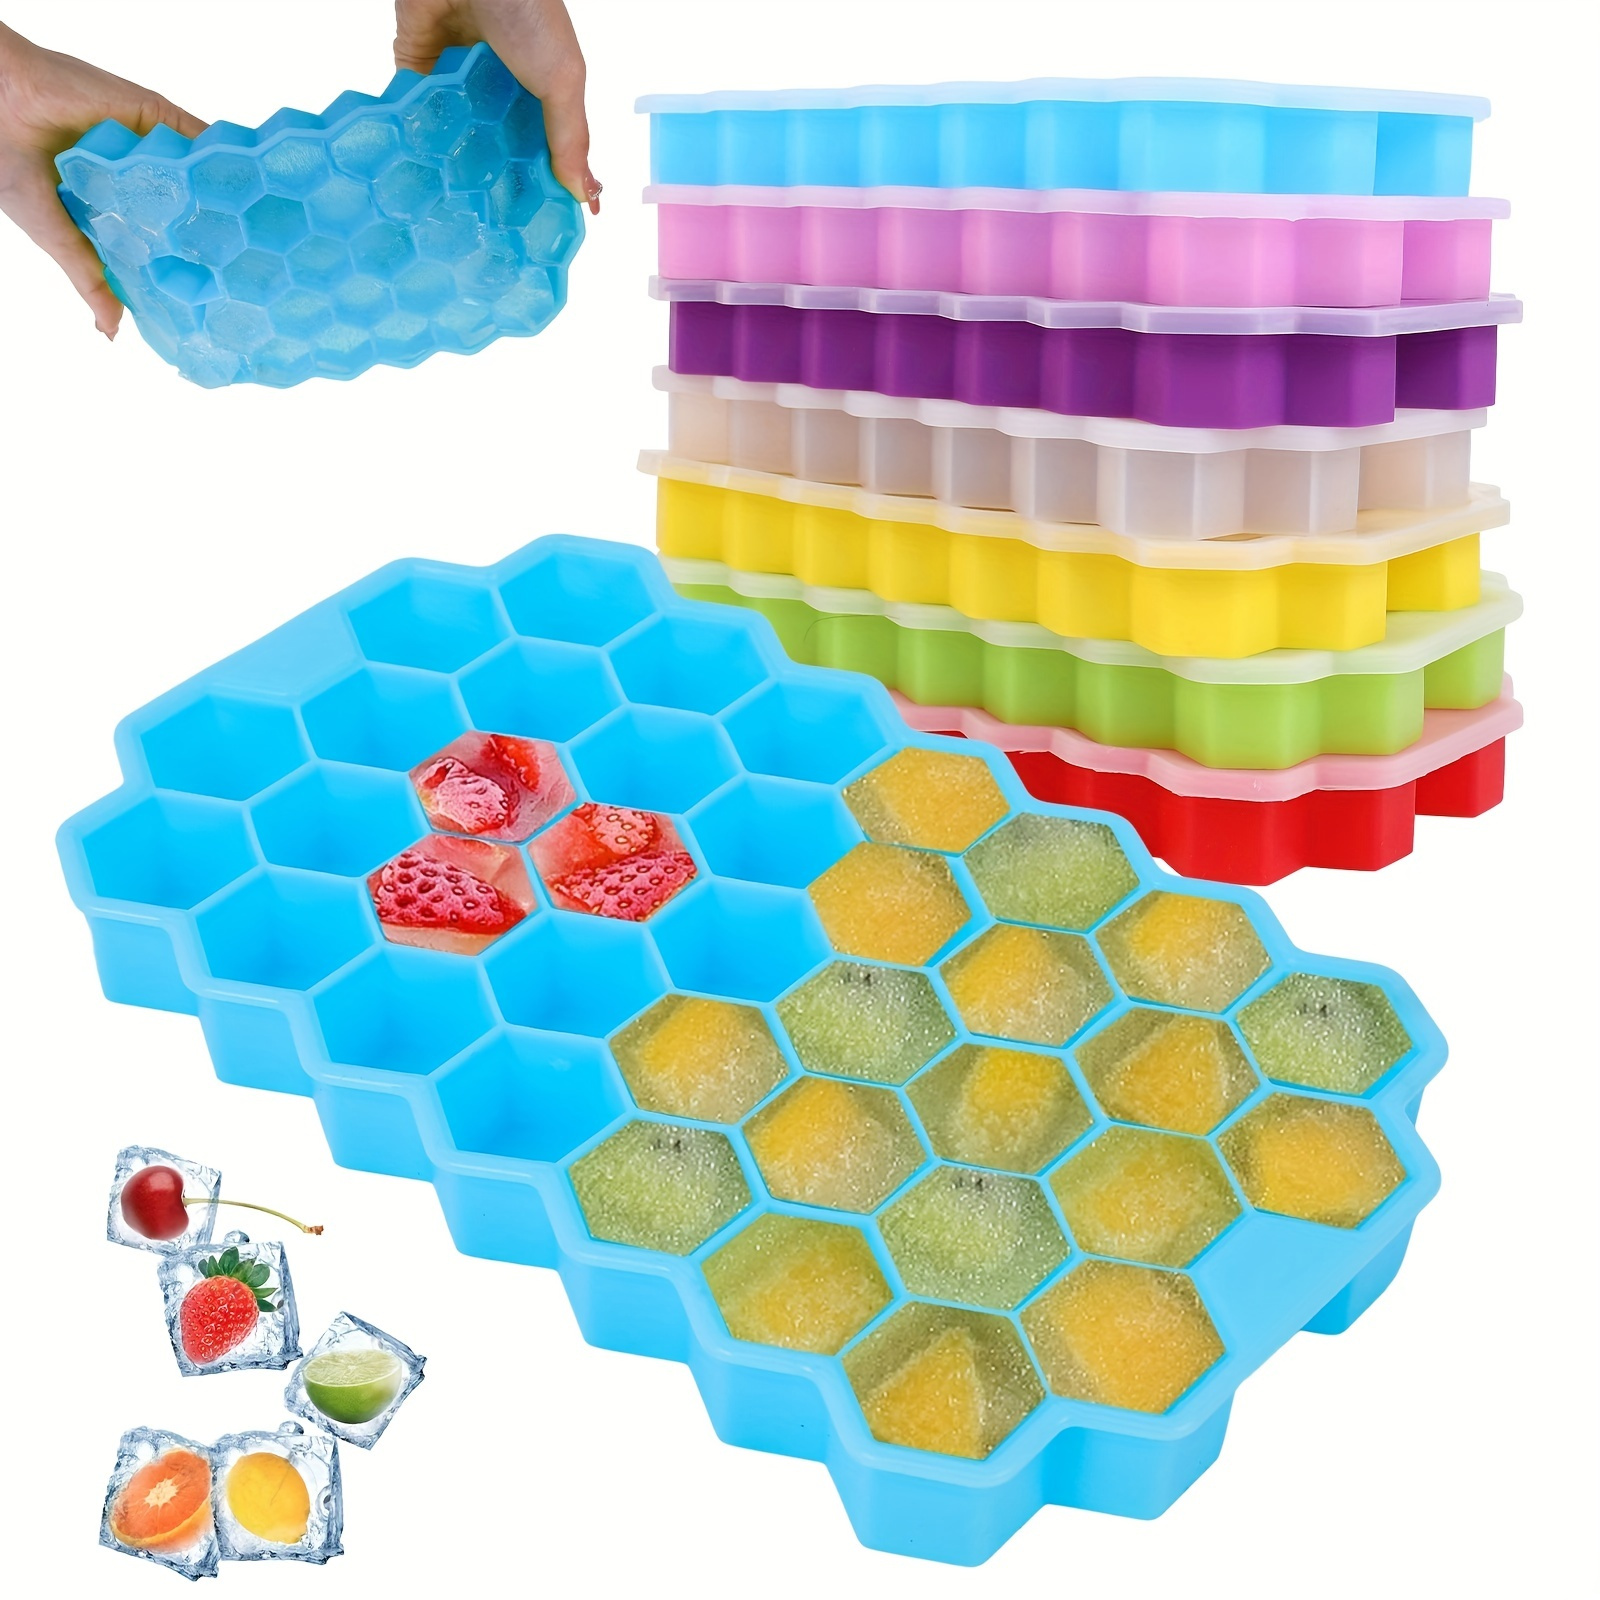 3pcs Epoxy Resin Coaster Molds Trays Square Circle Hexagon Silicone Mold  For Resin Casting, Diy Cup Mat